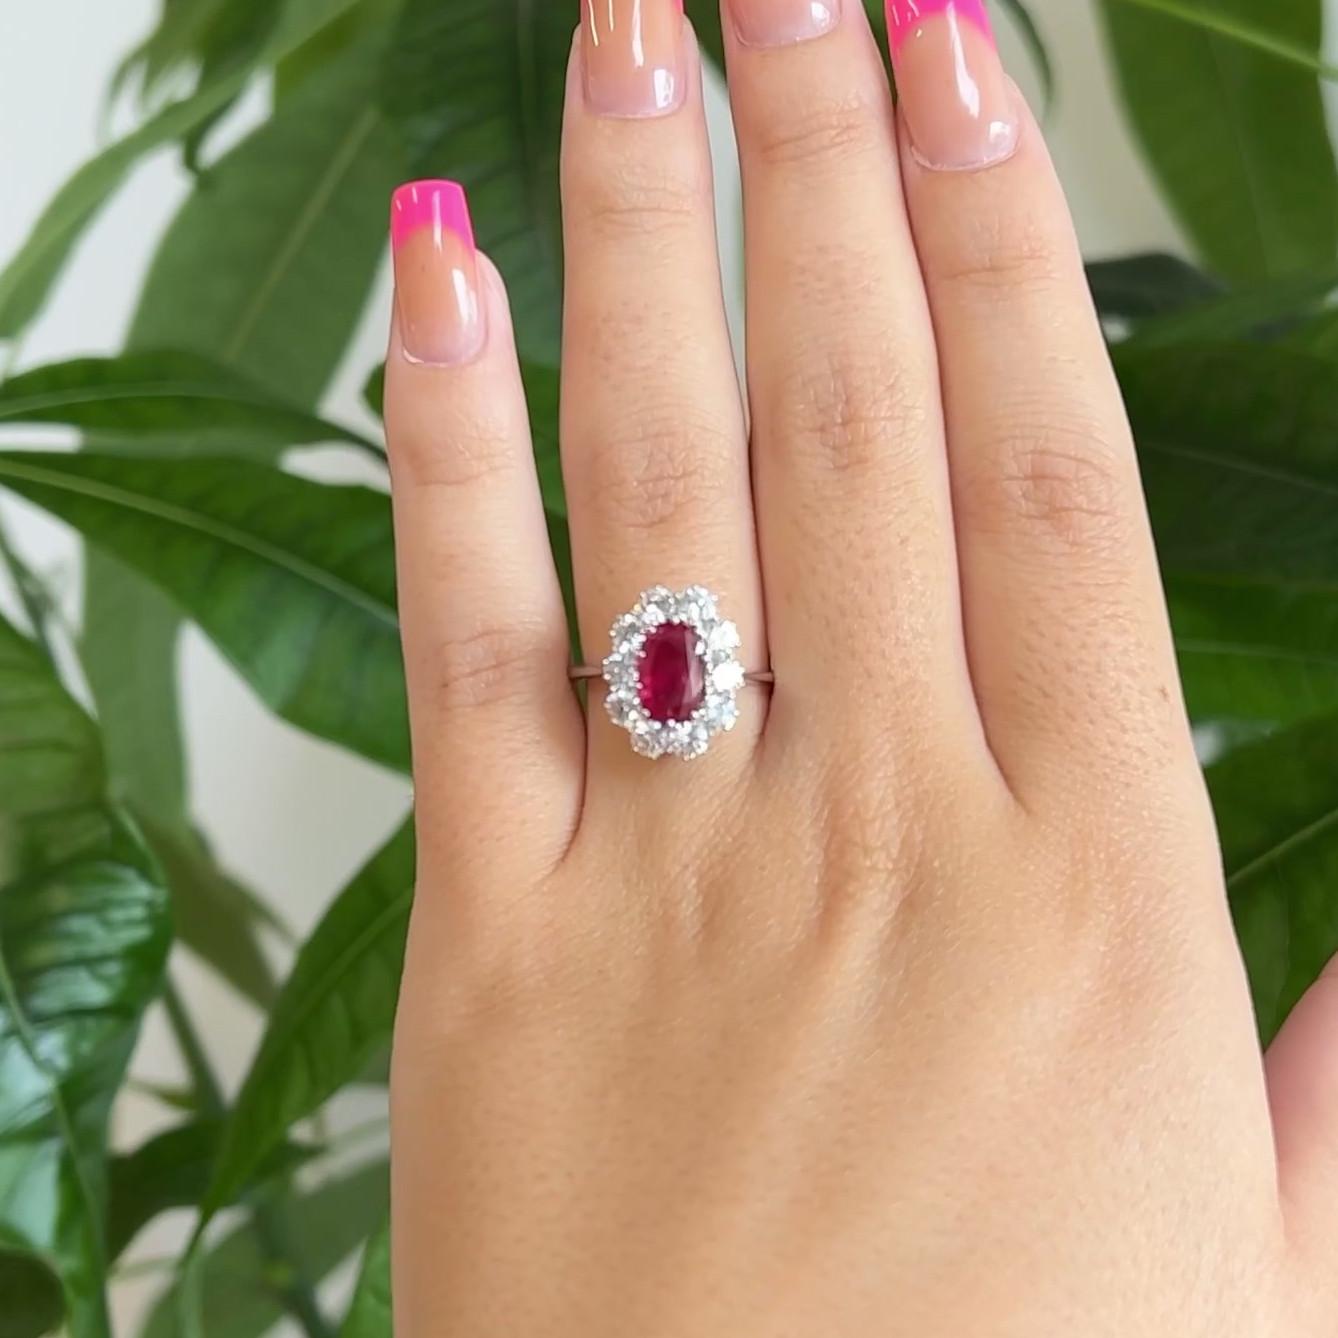 One Mid Century GIA No Heat Burma Ruby Diamond 18 Karat White Gold Halo Ring. Featuring one GIA certified oval shaped ruby of approximately 1.13 carats, accompanied with certificate #5221441280 stating the ruby is Burma in origin, with no